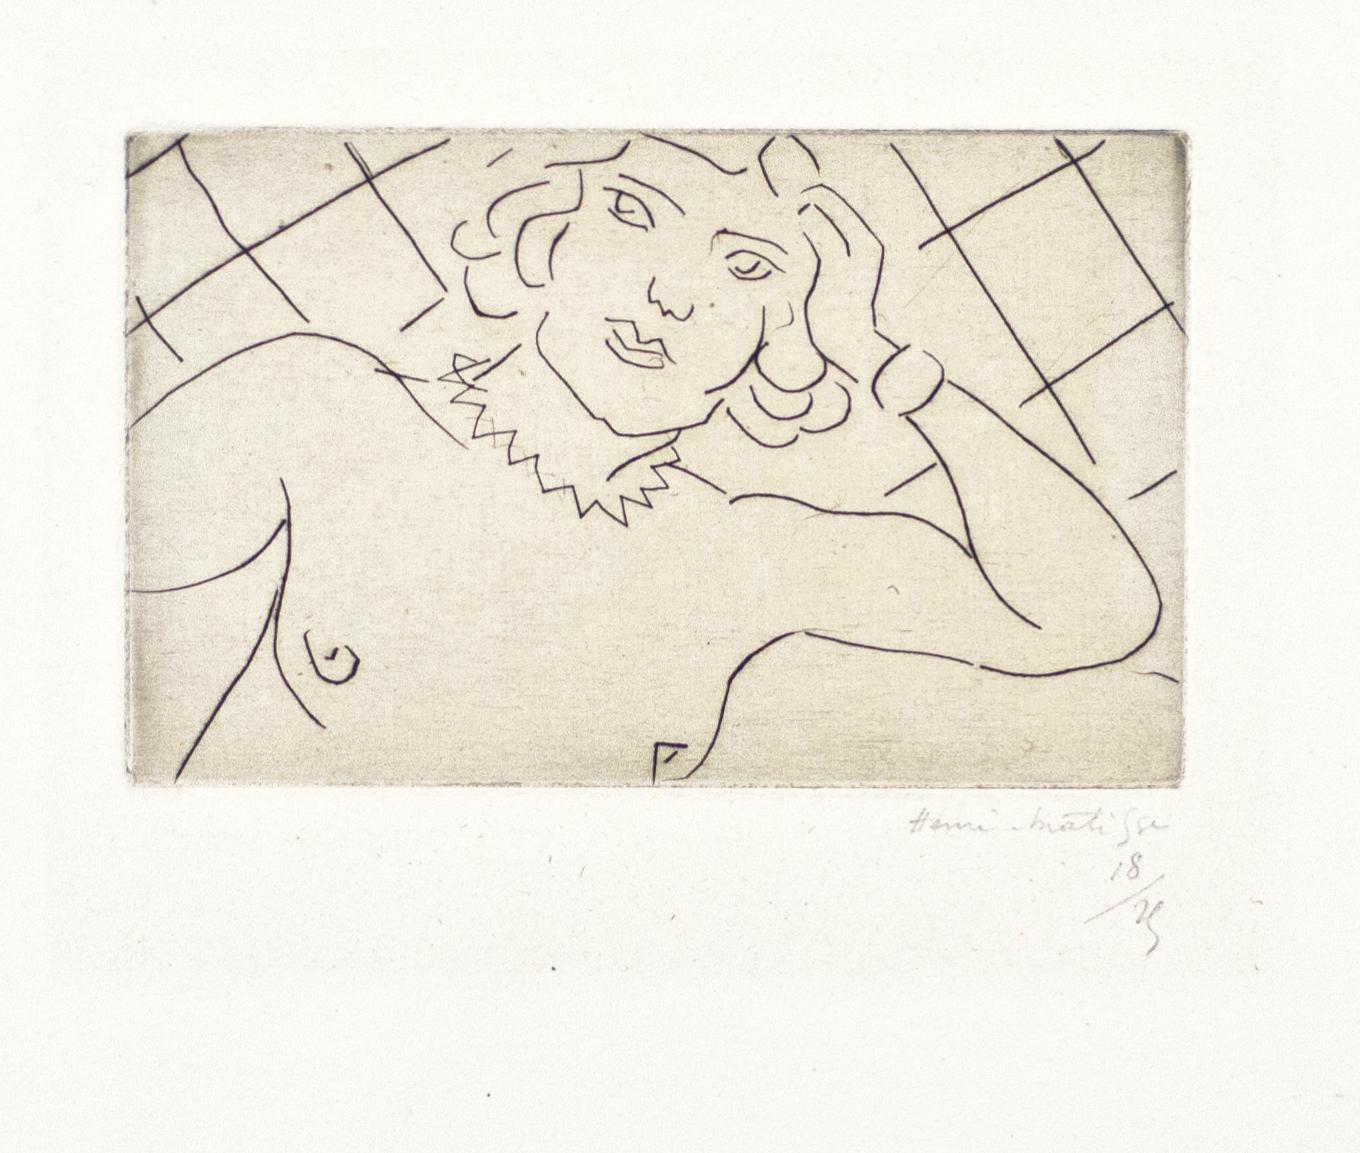 Henri Matisse Nude Print - Torse, Fond à Losanges - Drypoint on China by H. Matisse, 1929